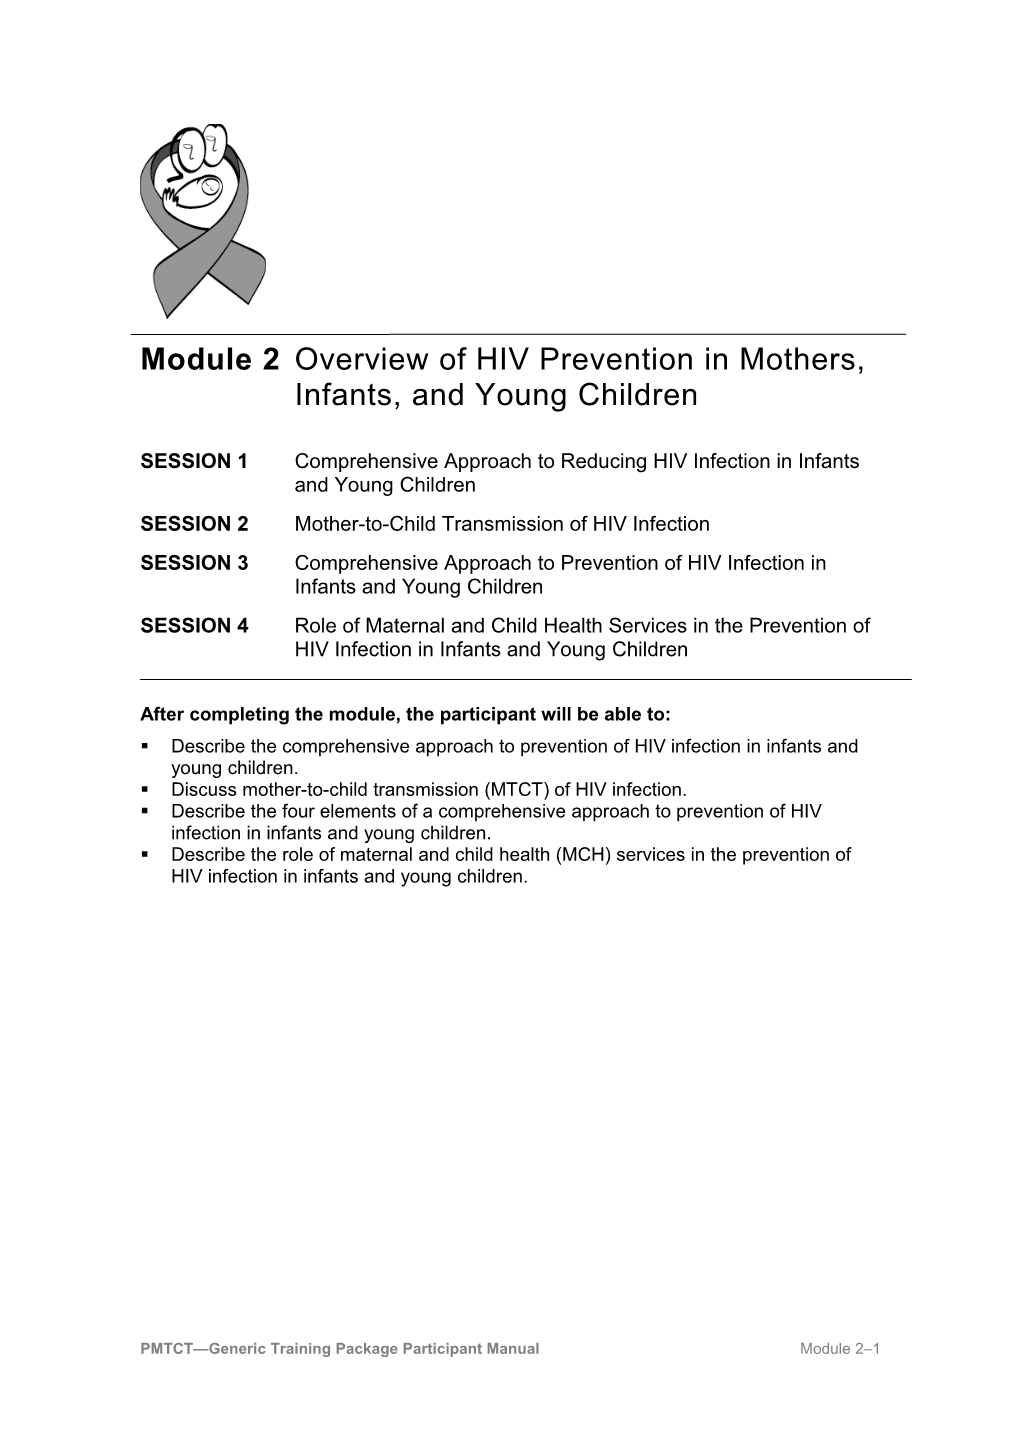 Module 2 Overview of HIV Prevention in Mothers, Infants, and Young Children